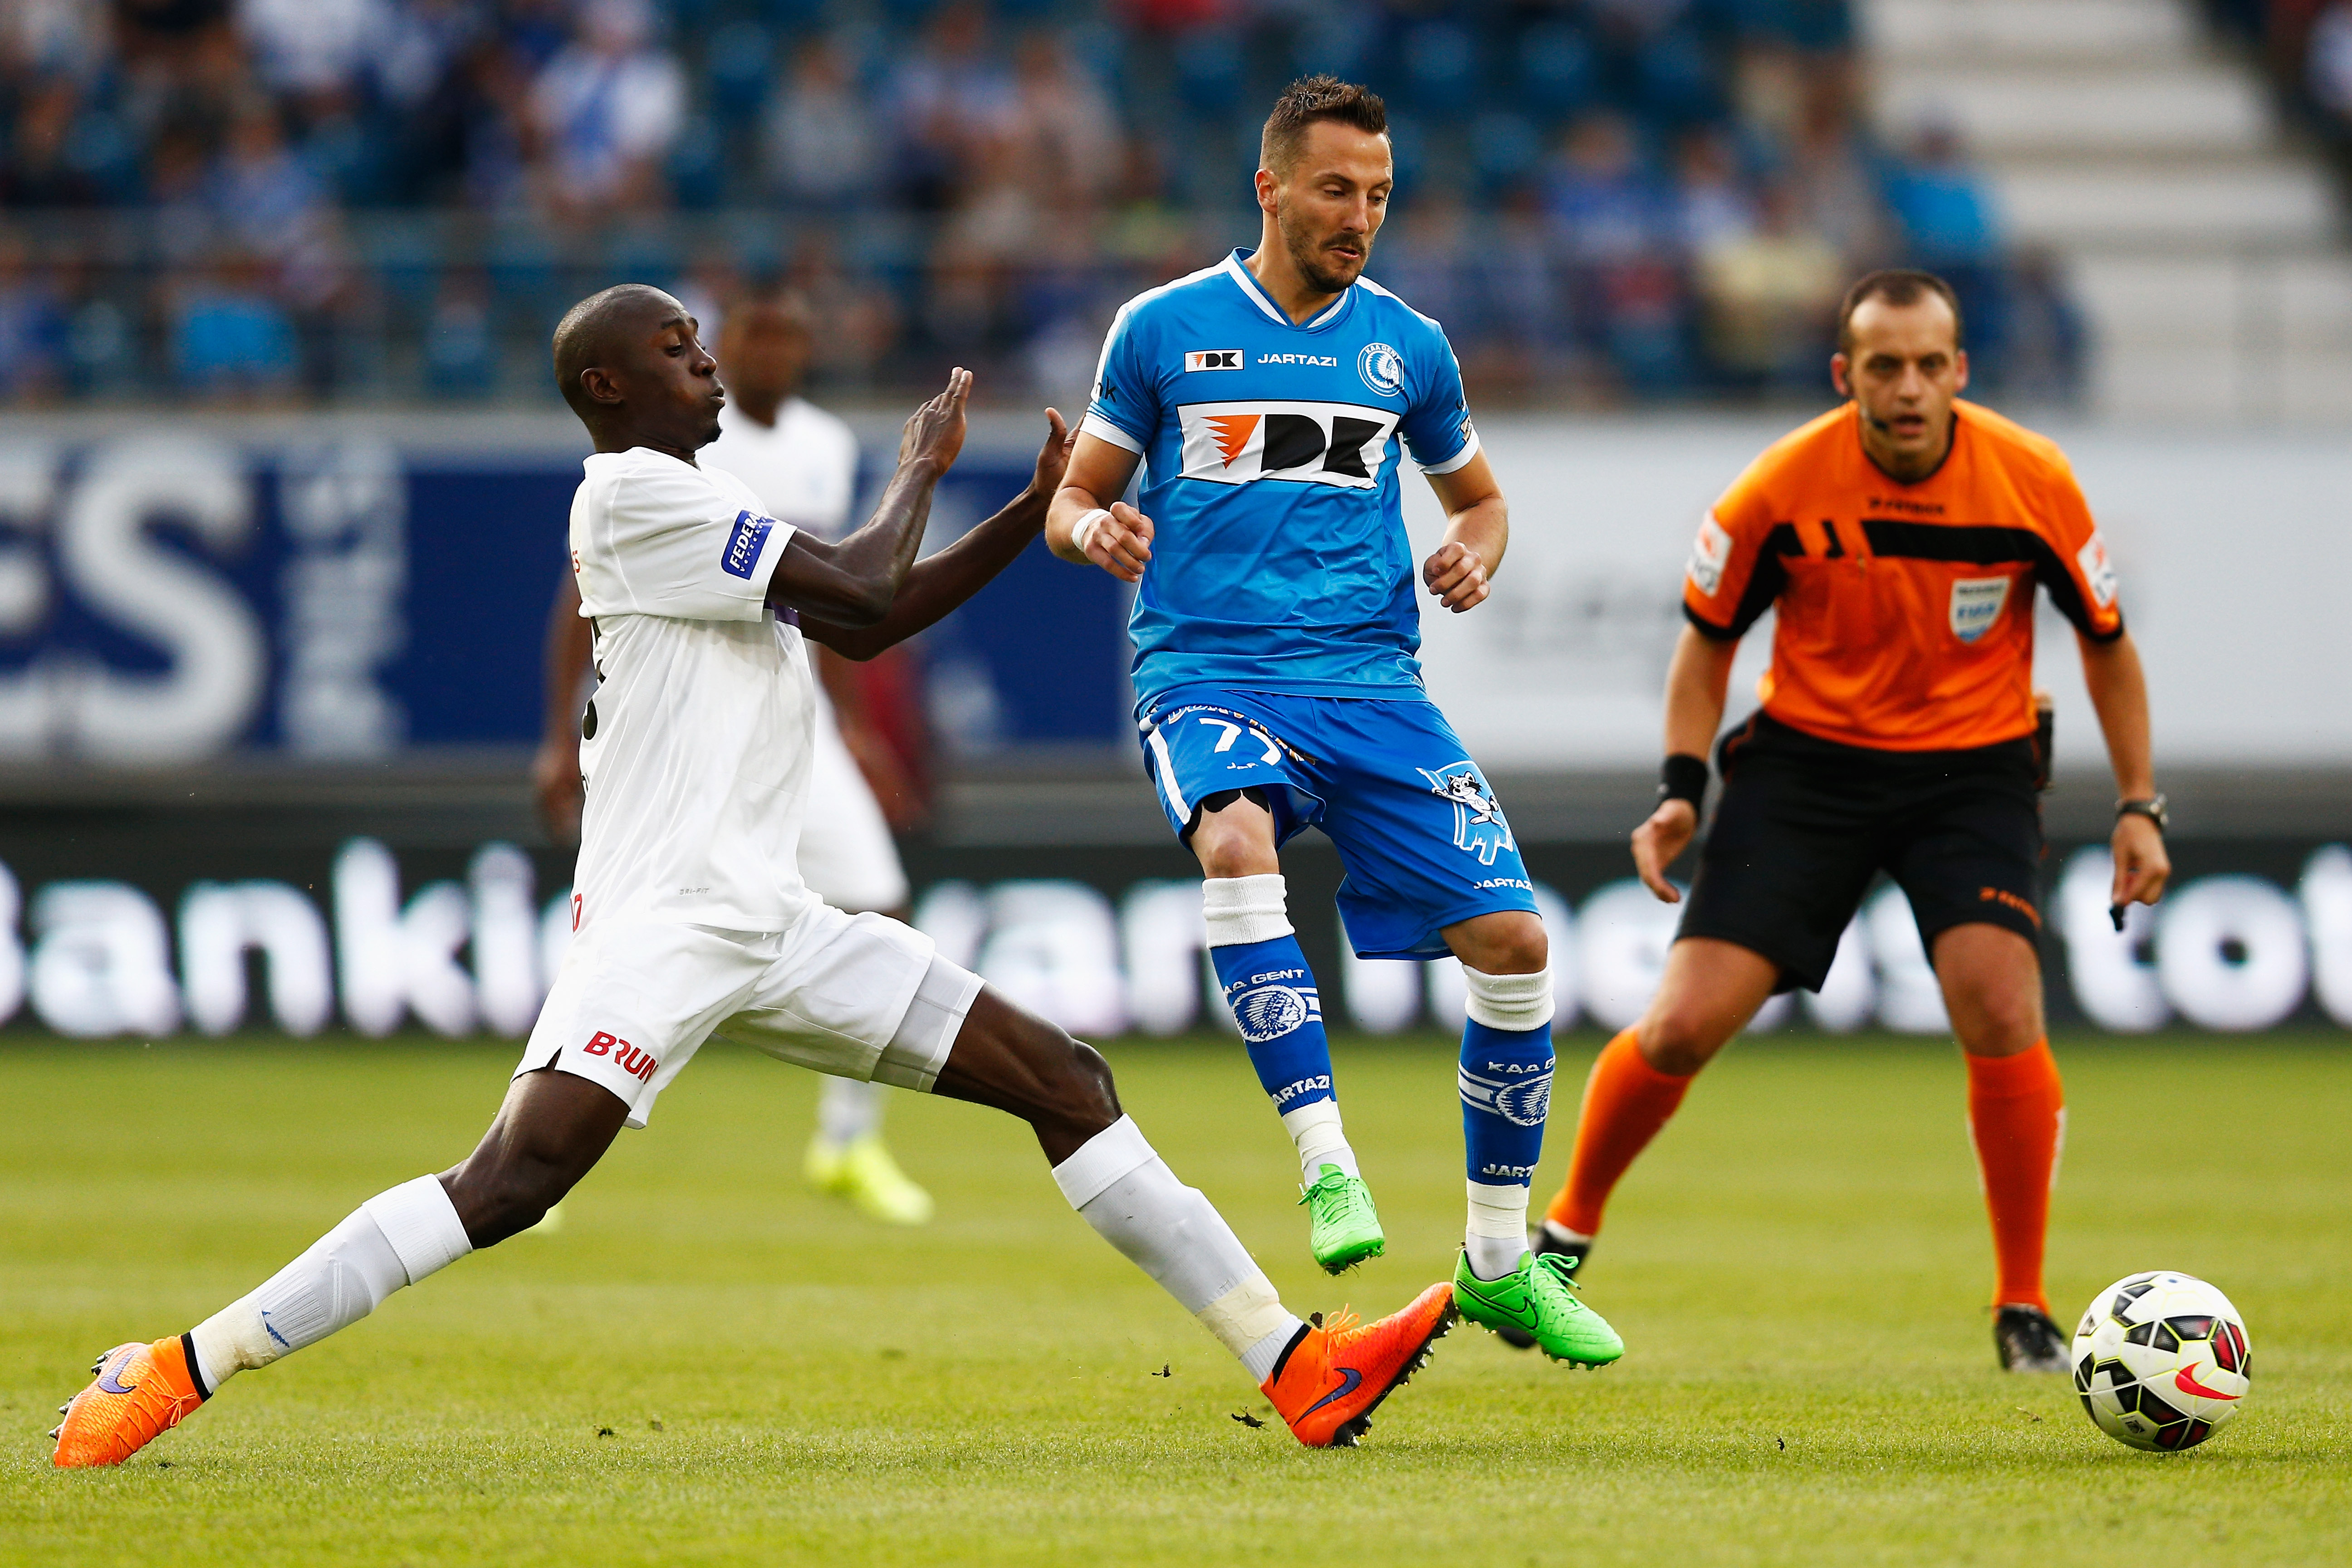 GENT, BELGIUM - JULY 31:  Danijel Milicevic of Gent battles for the ball with Wilfred Ndidi of Genk  during the Jupiler League match between KAA Gent and KRC Genk held at the Ghelamco Arena on July 31, 2015 in Gent, Belgium.  (Photo by Dean Mouhtaropoulos/Getty Images)